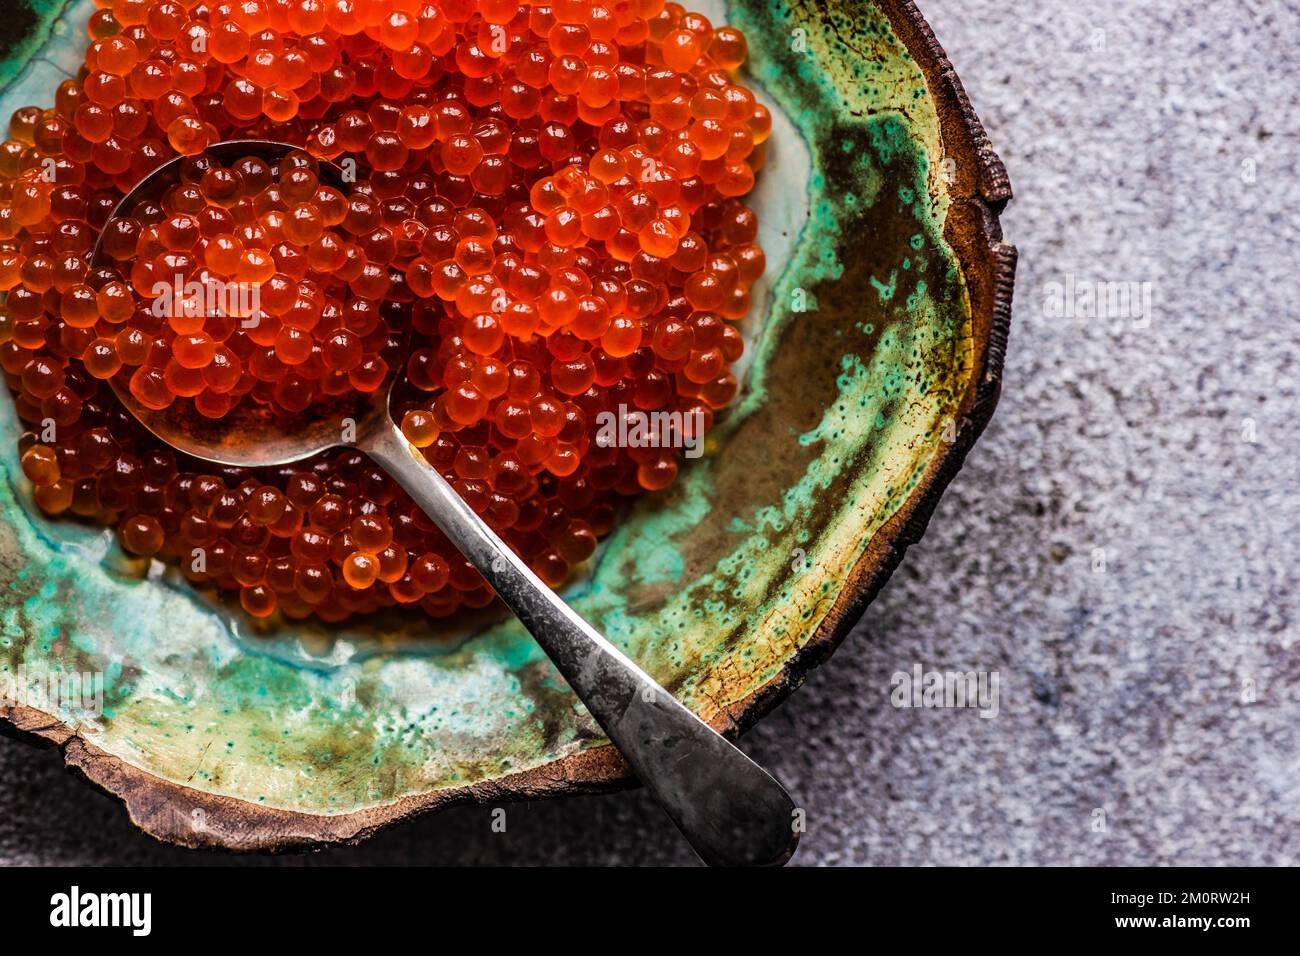 Close-up overhead view of a bowl of red trout caviar Stock Photo - Alamy